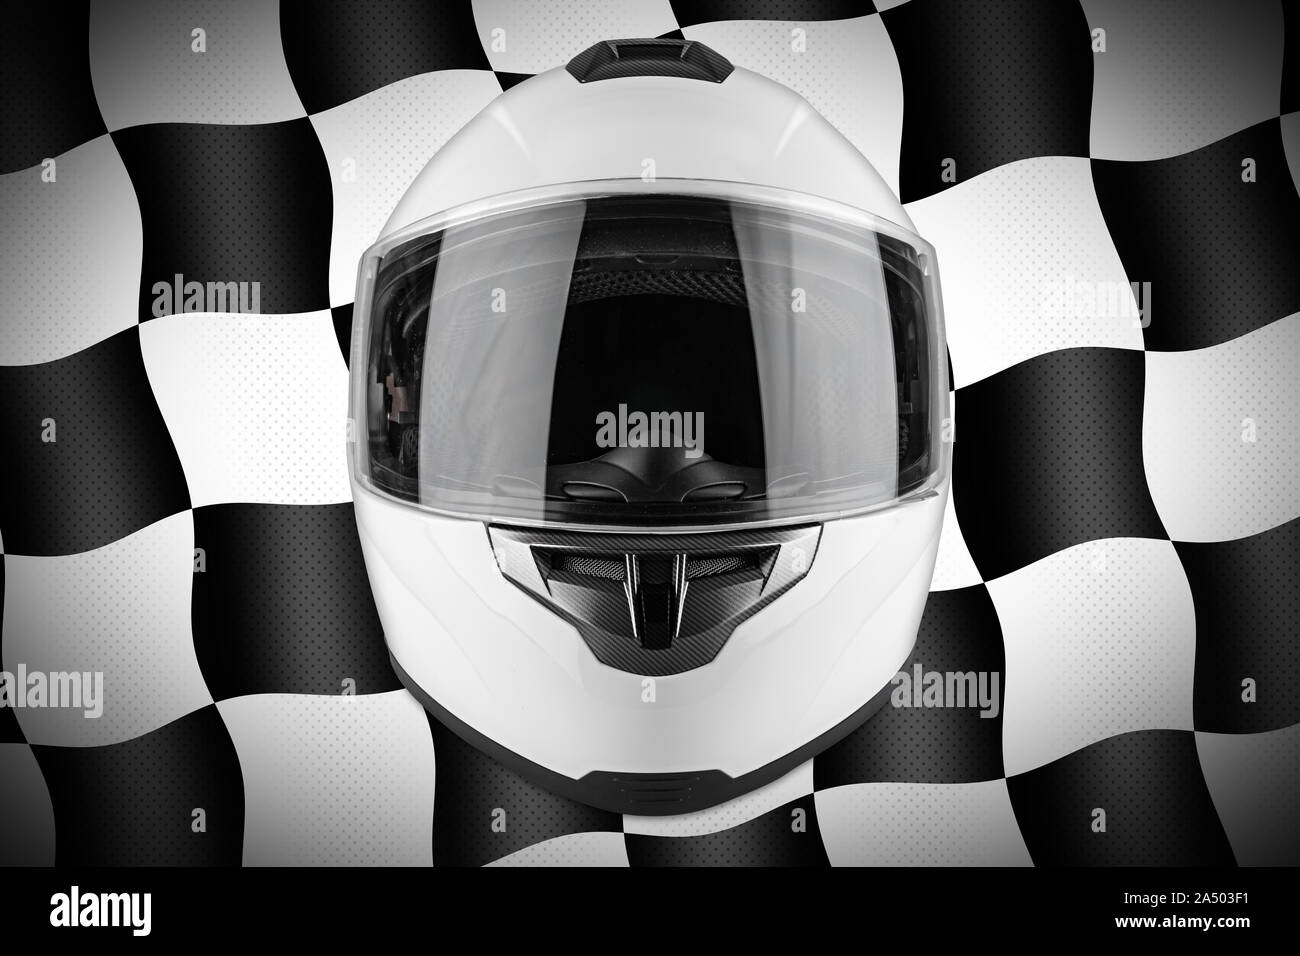 White motorcycle carbon integral crash helmet in front of motorsport black and chequered flag background. car kart racing transportation safety concep Stock Photo